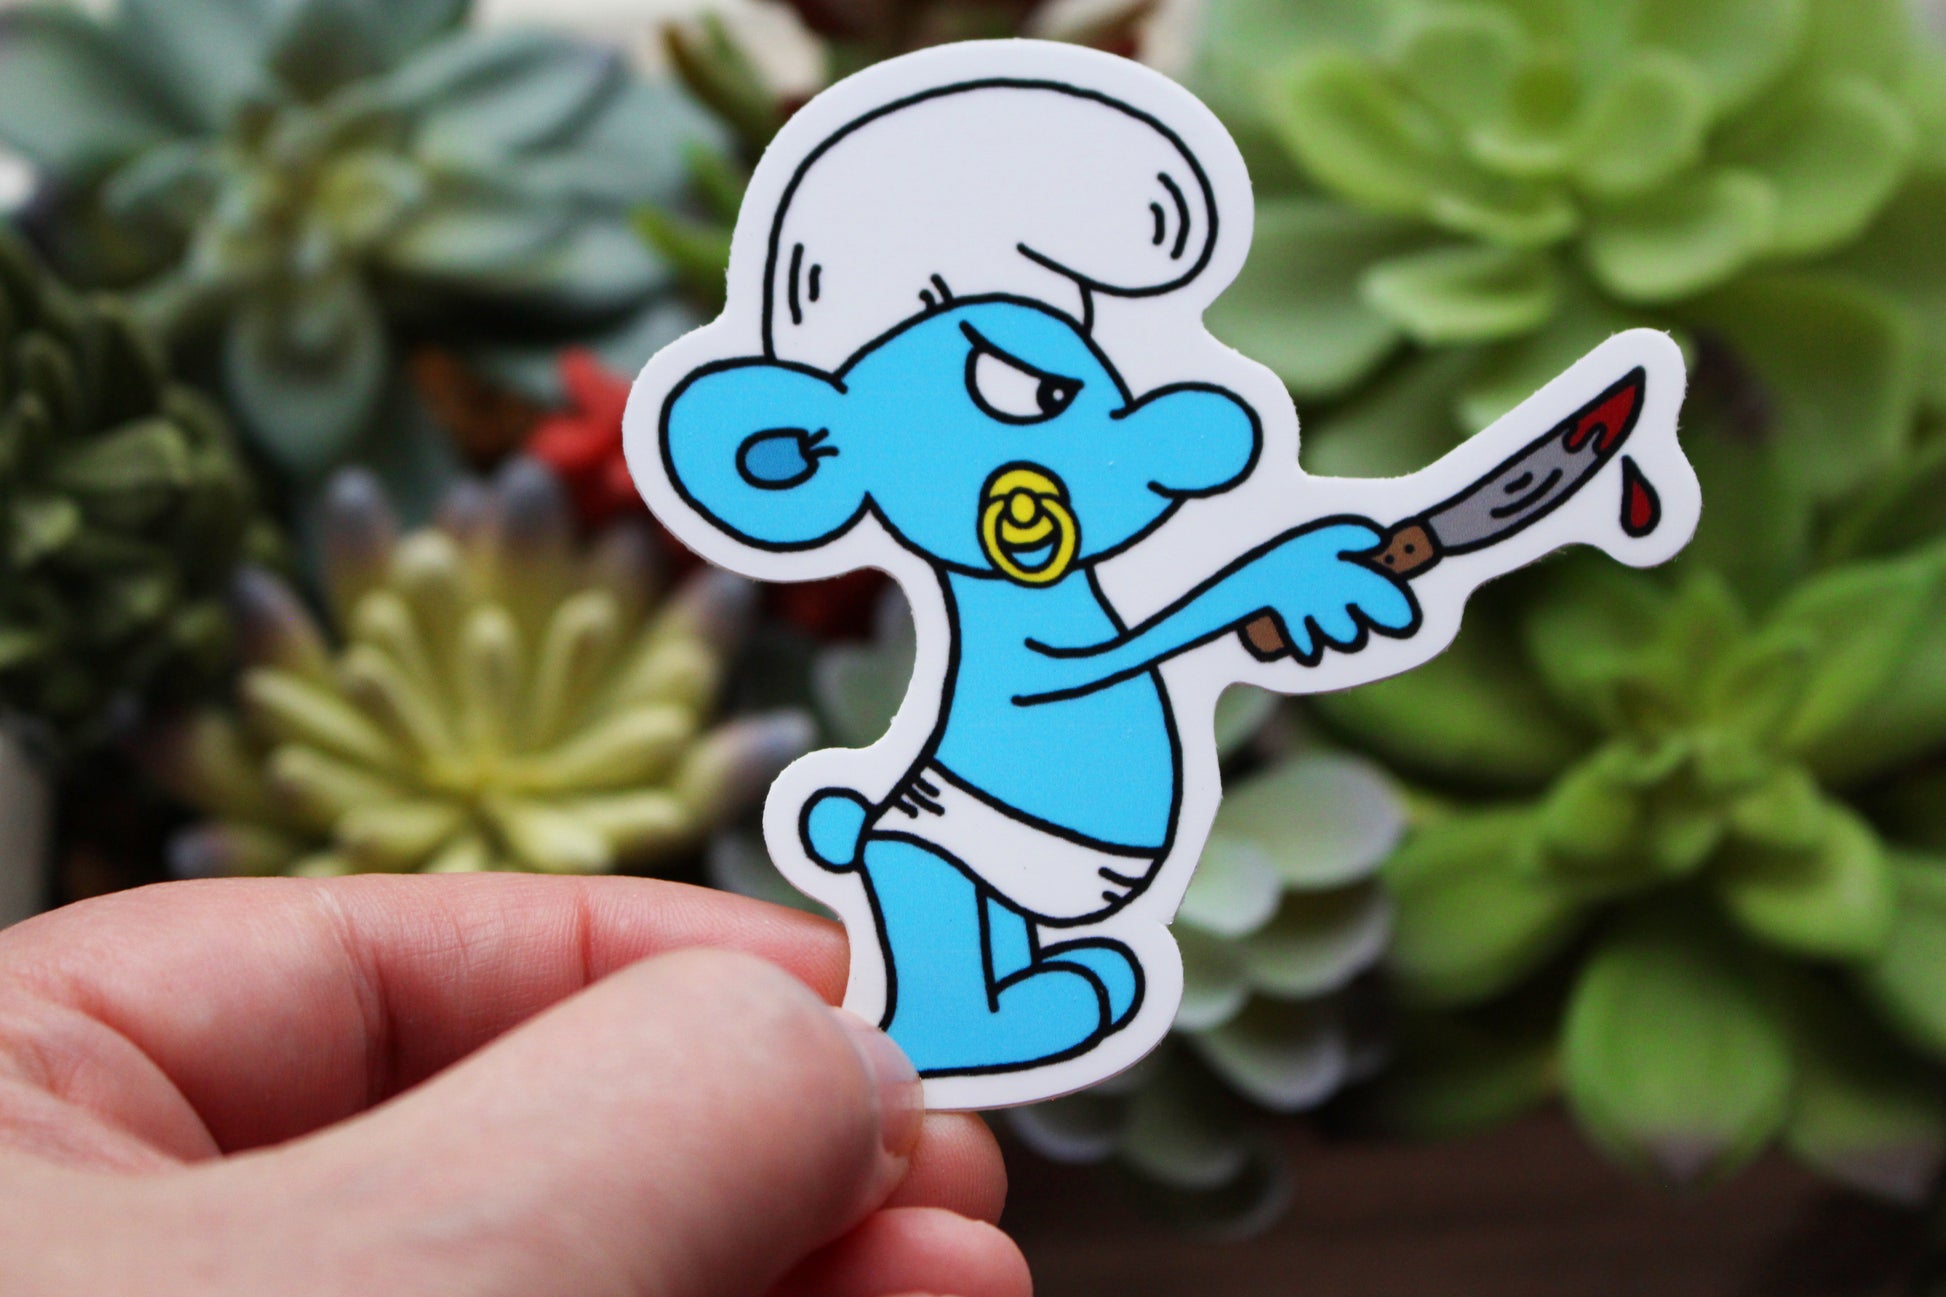 Baby Smurf Wearing a diaper sucking a pacifier holding a bloody knife sticker horror parody by SpookyKillerBabies.com